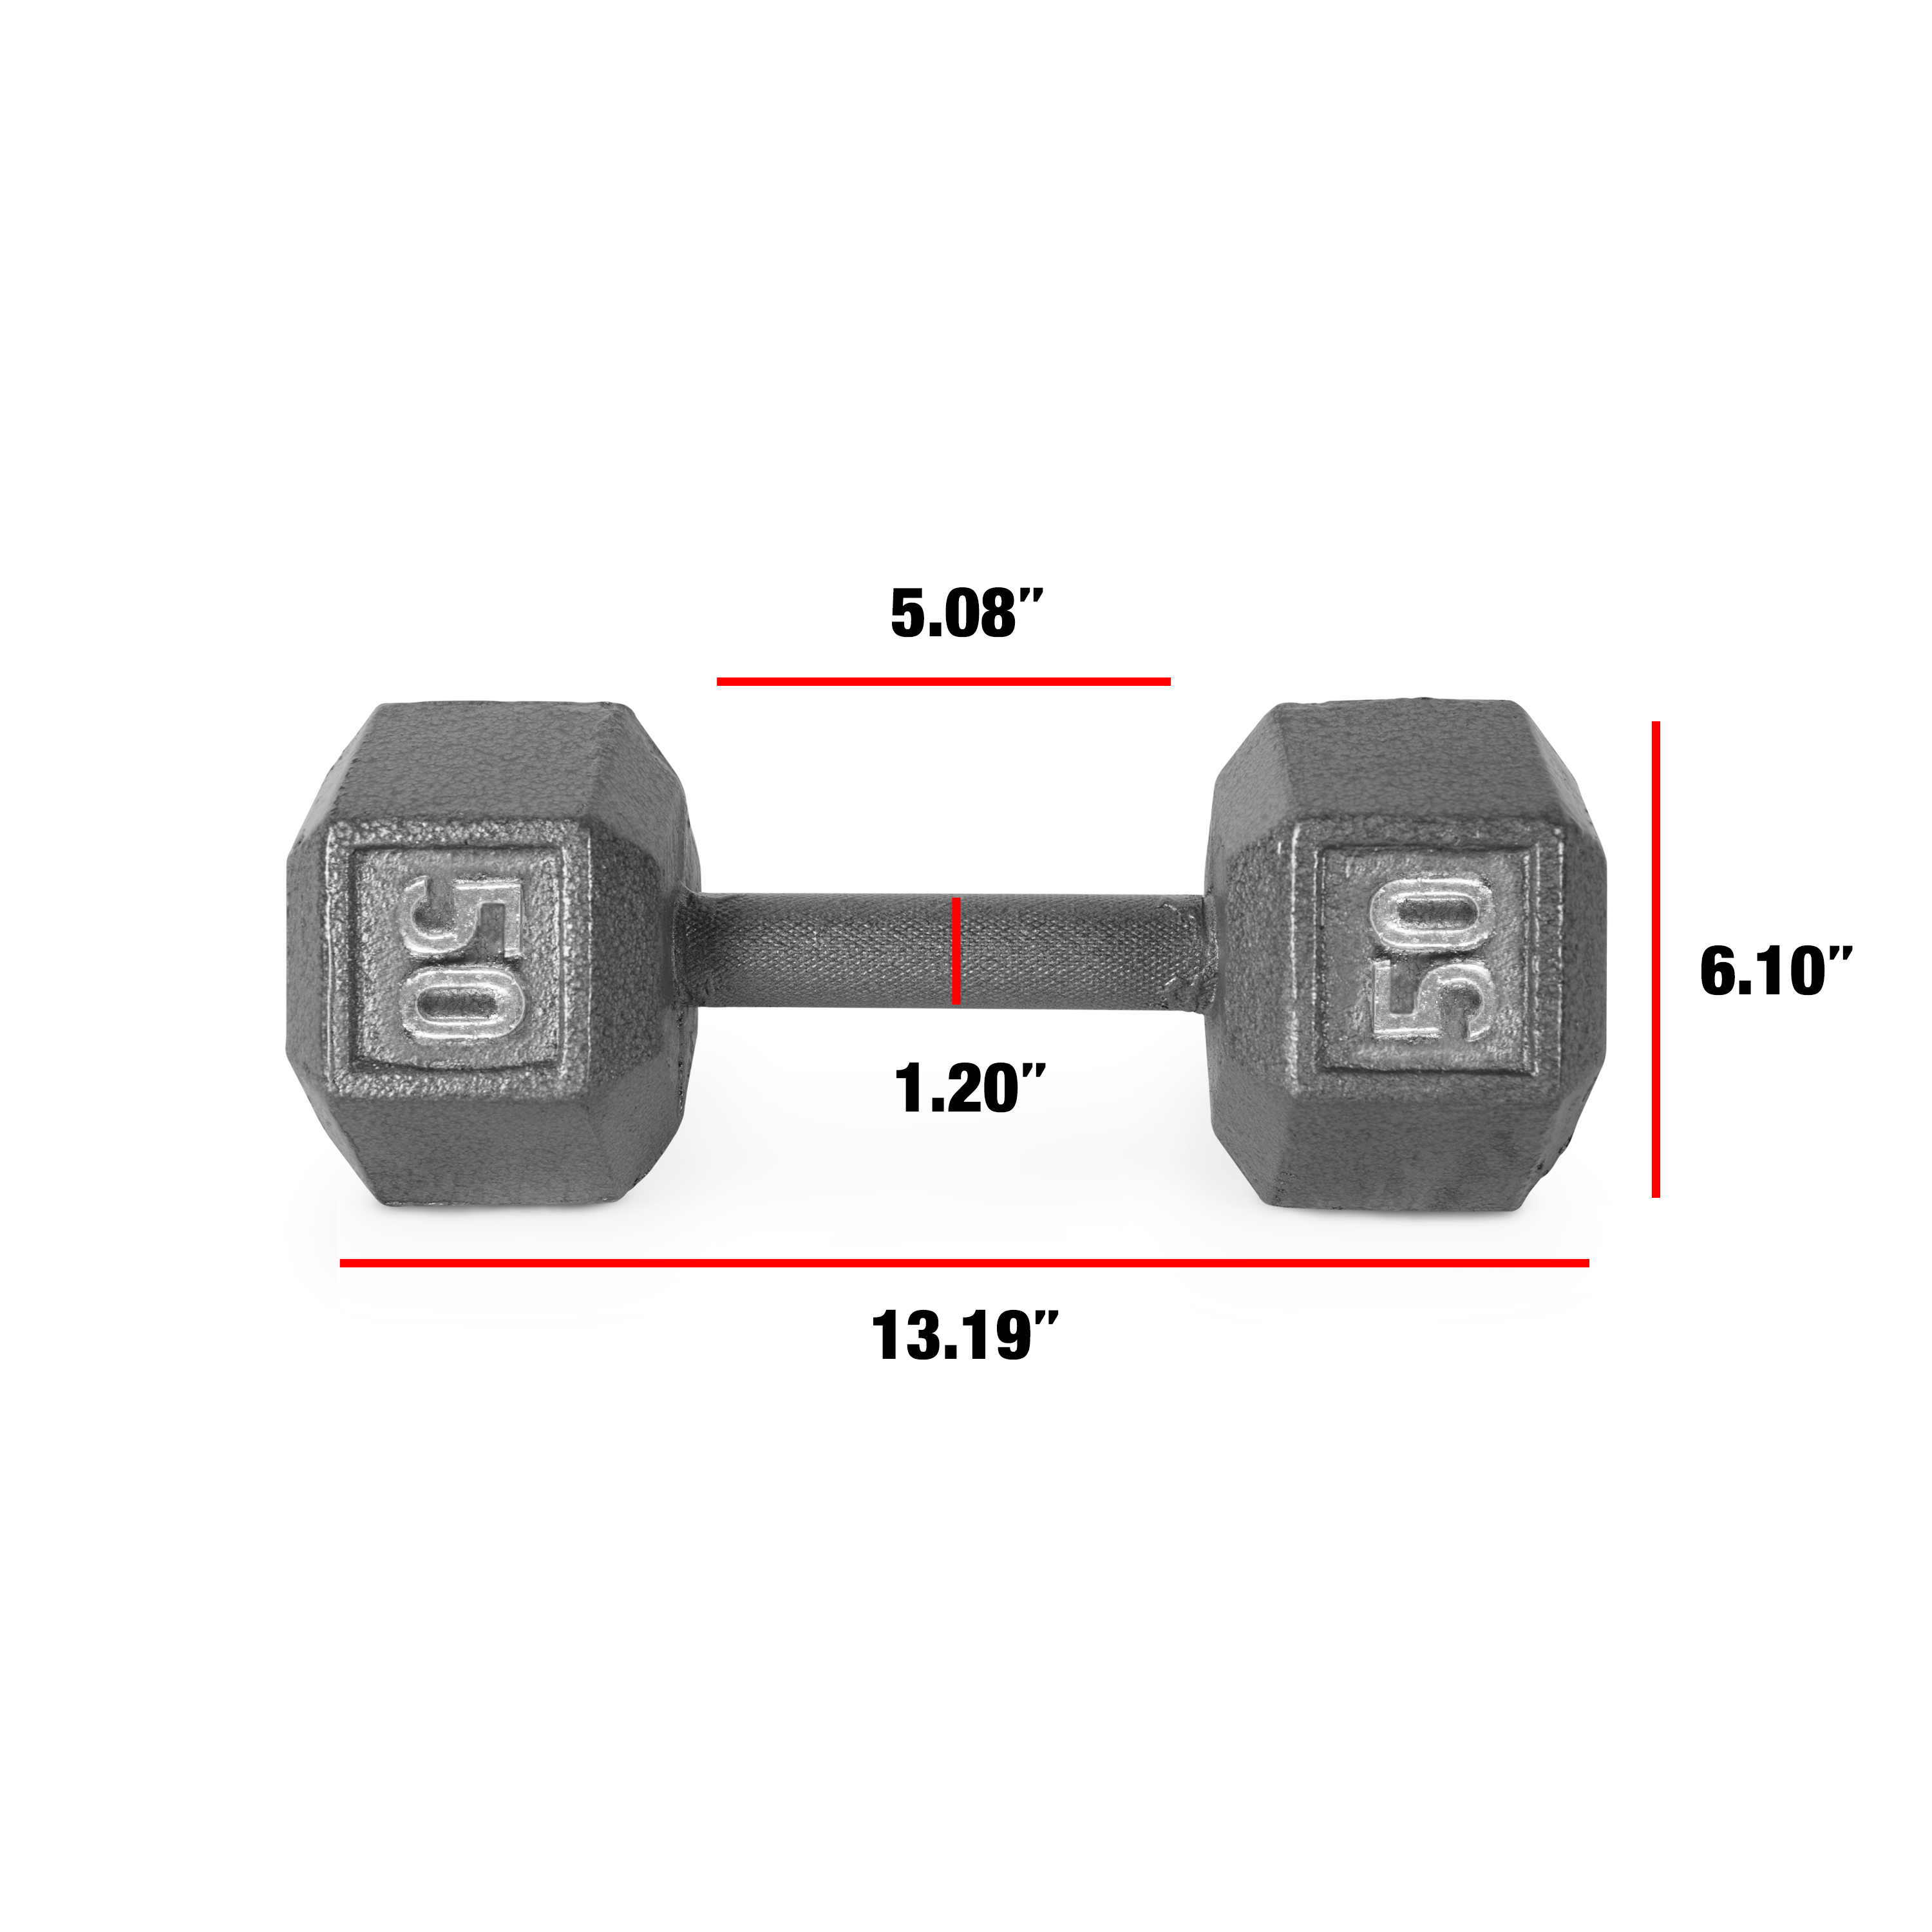 CAP Barbell 50lb Cast Iron Hex Dumbbell, Single - image 5 of 6